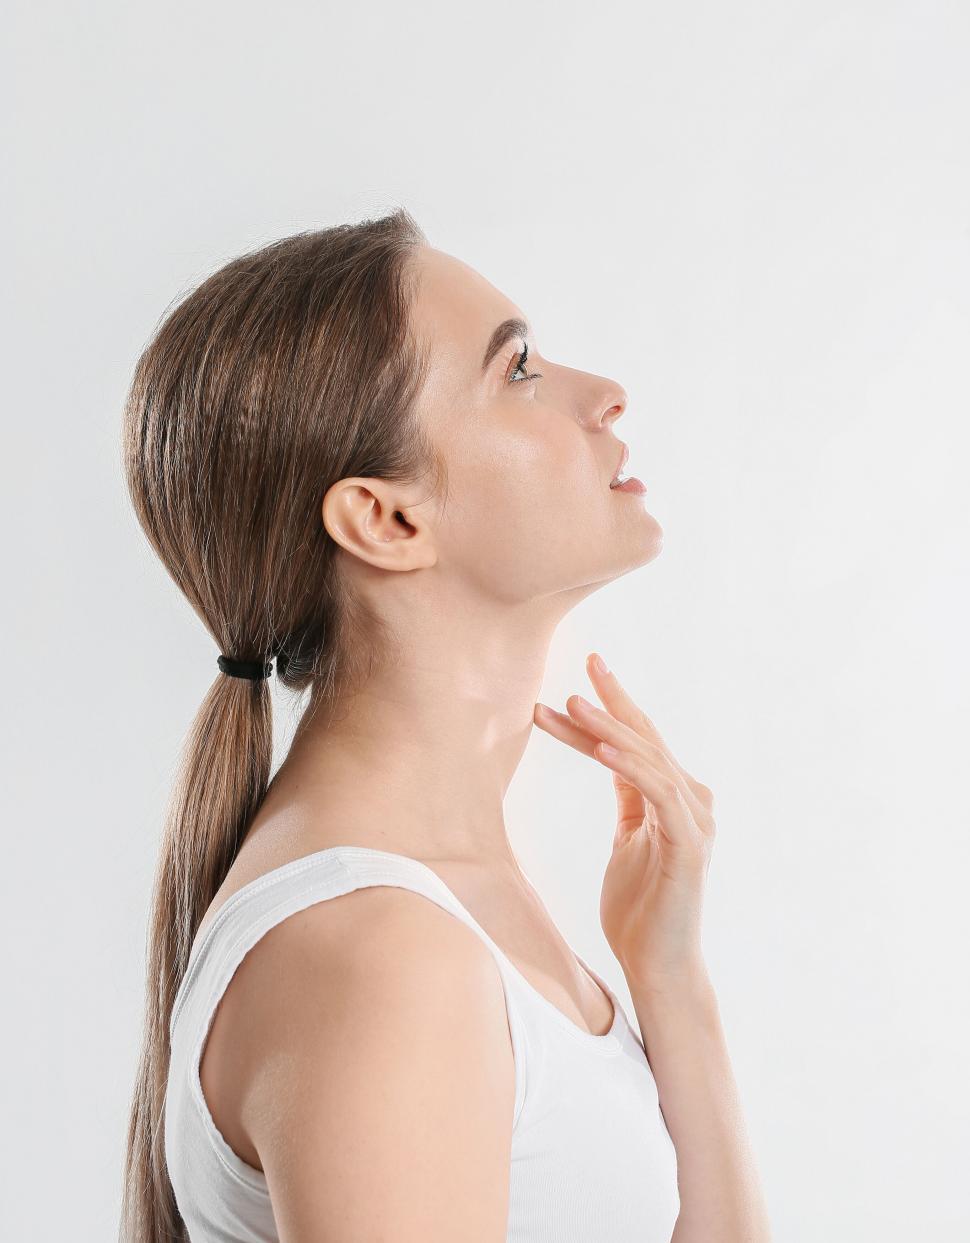 Free Image of A woman with her hand on her chin 